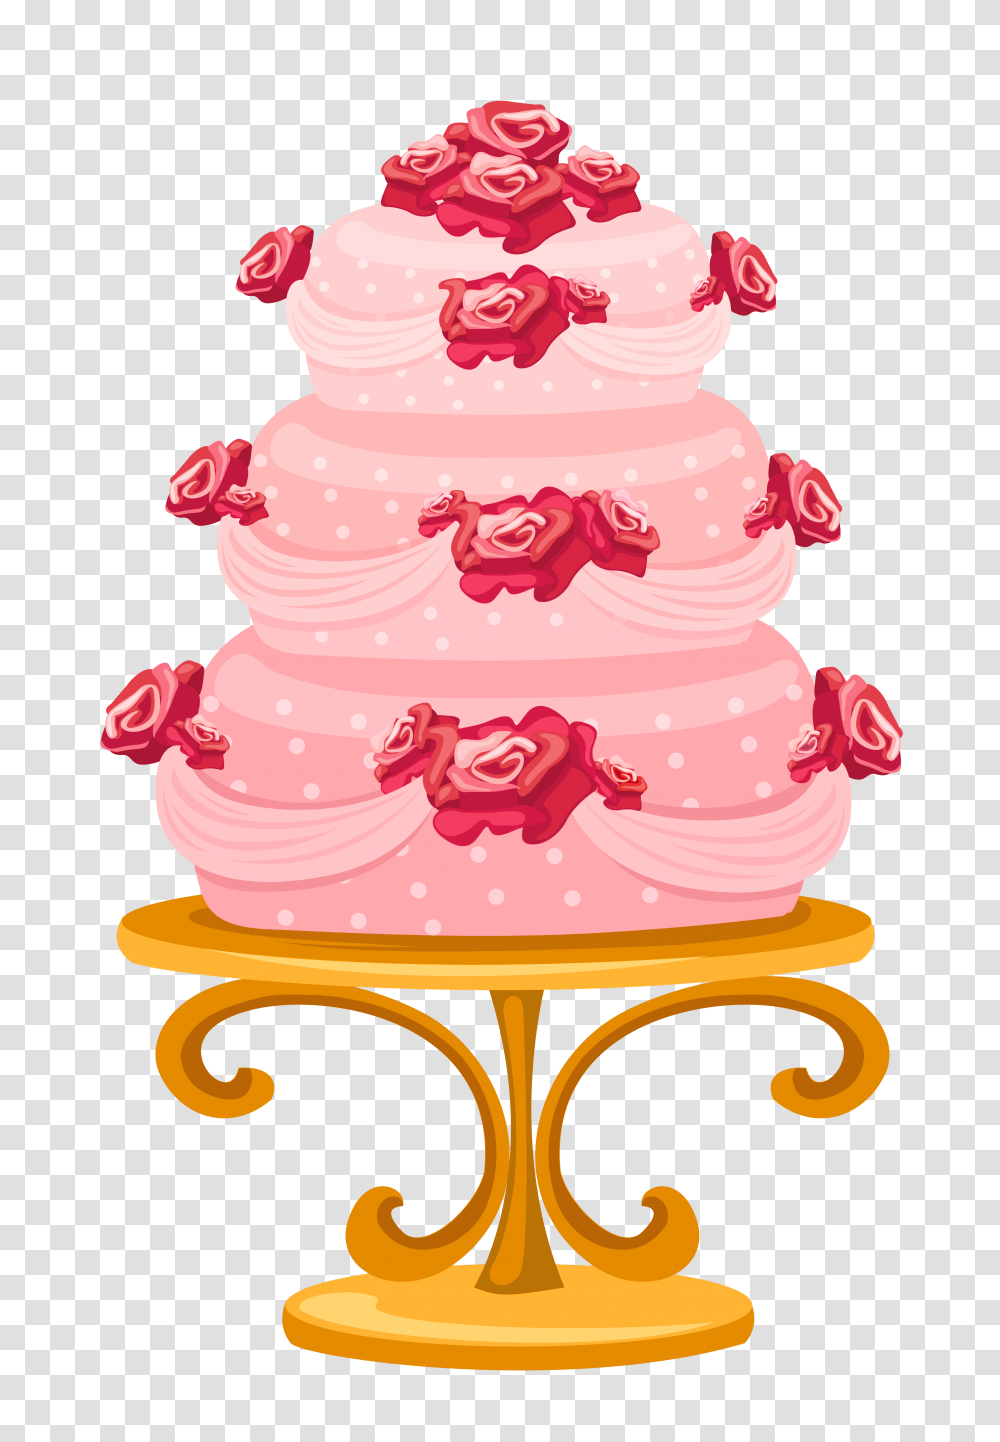 Cake With Roses Clipart, Dessert, Food, Wedding Cake, Cream Transparent Png